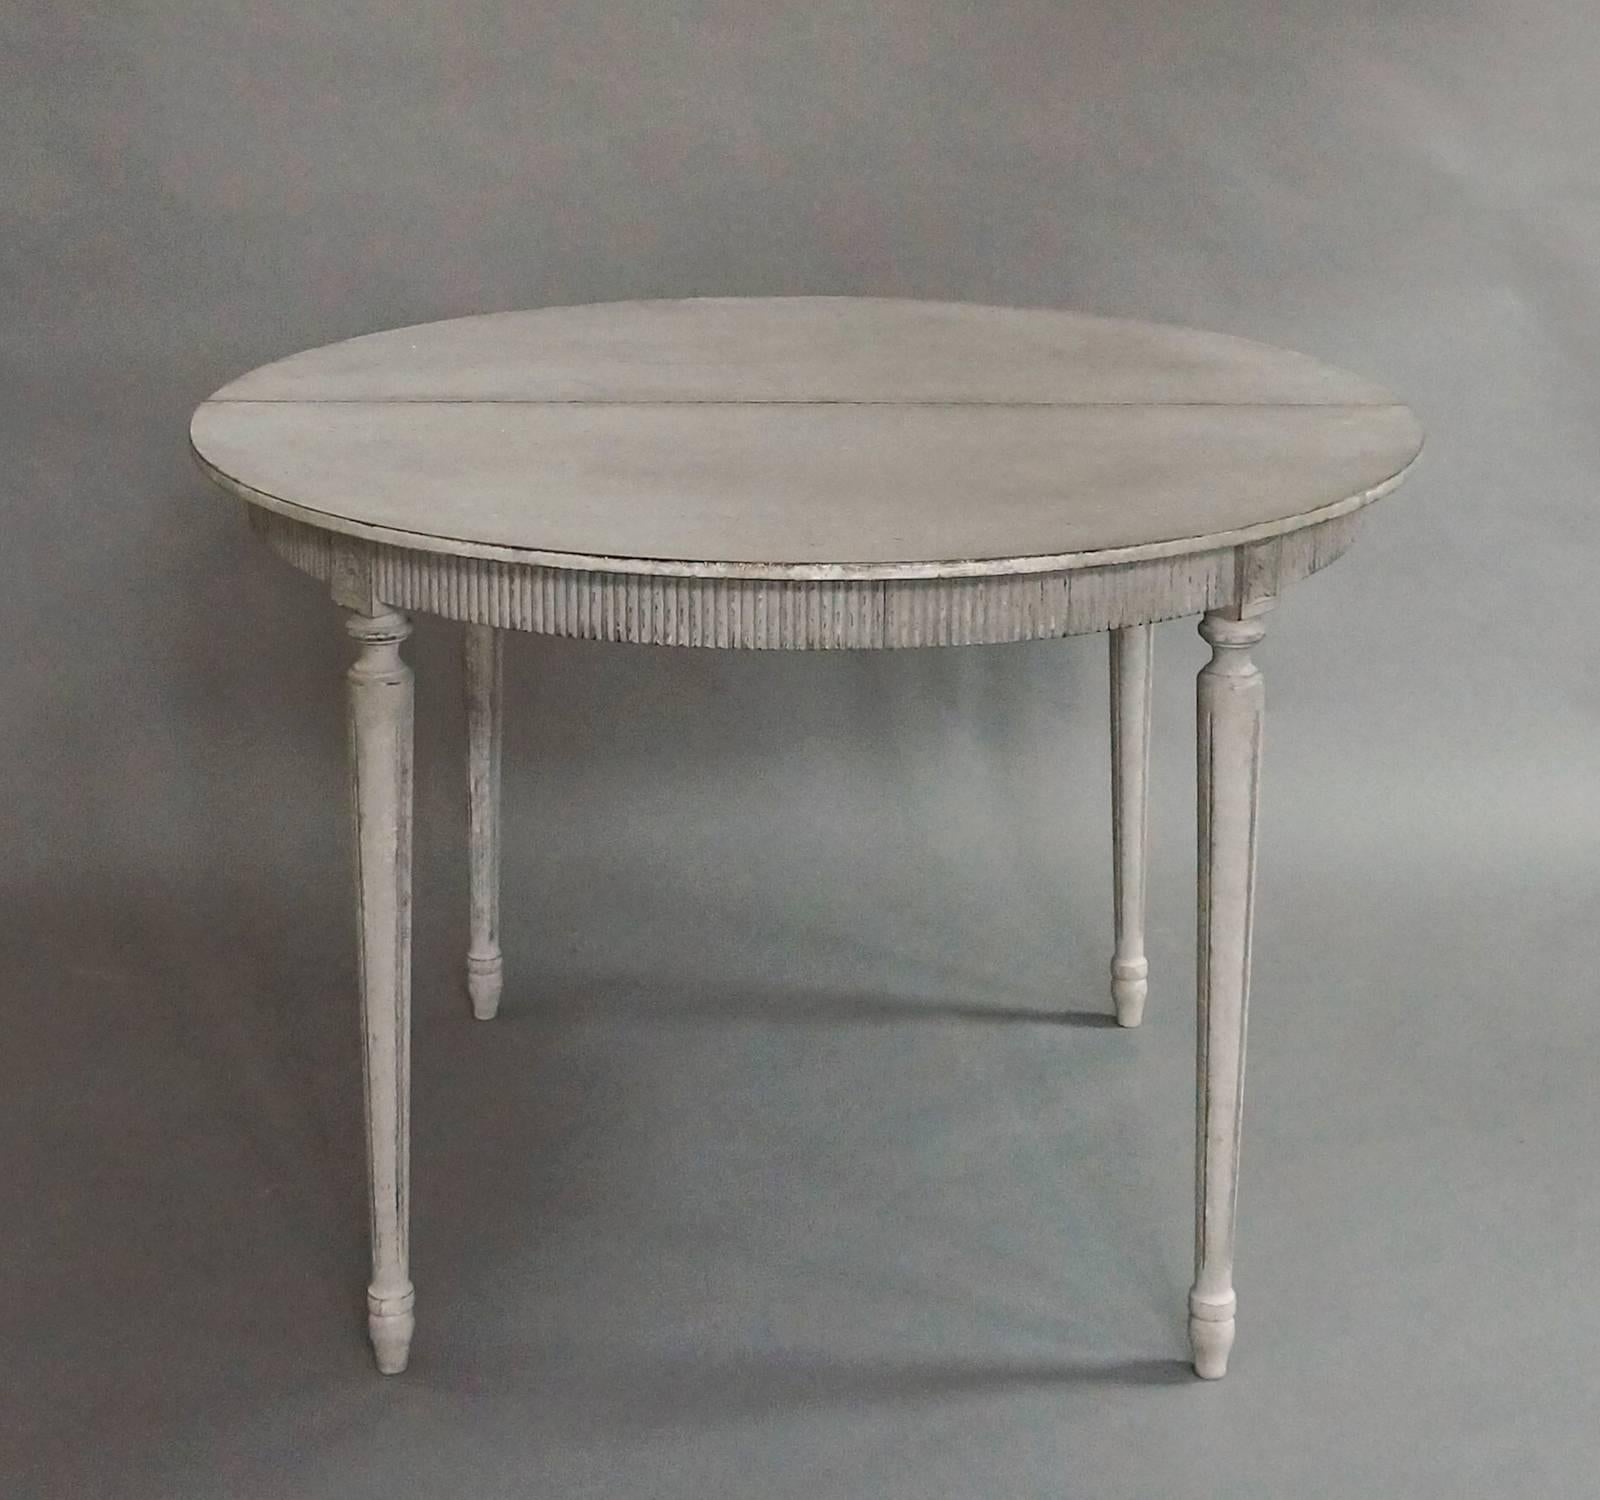 Swedish dining table in the Gustavian style, circa 1890. Fluted apron with quatrefoil detail at the top of each turned leg. Two 19